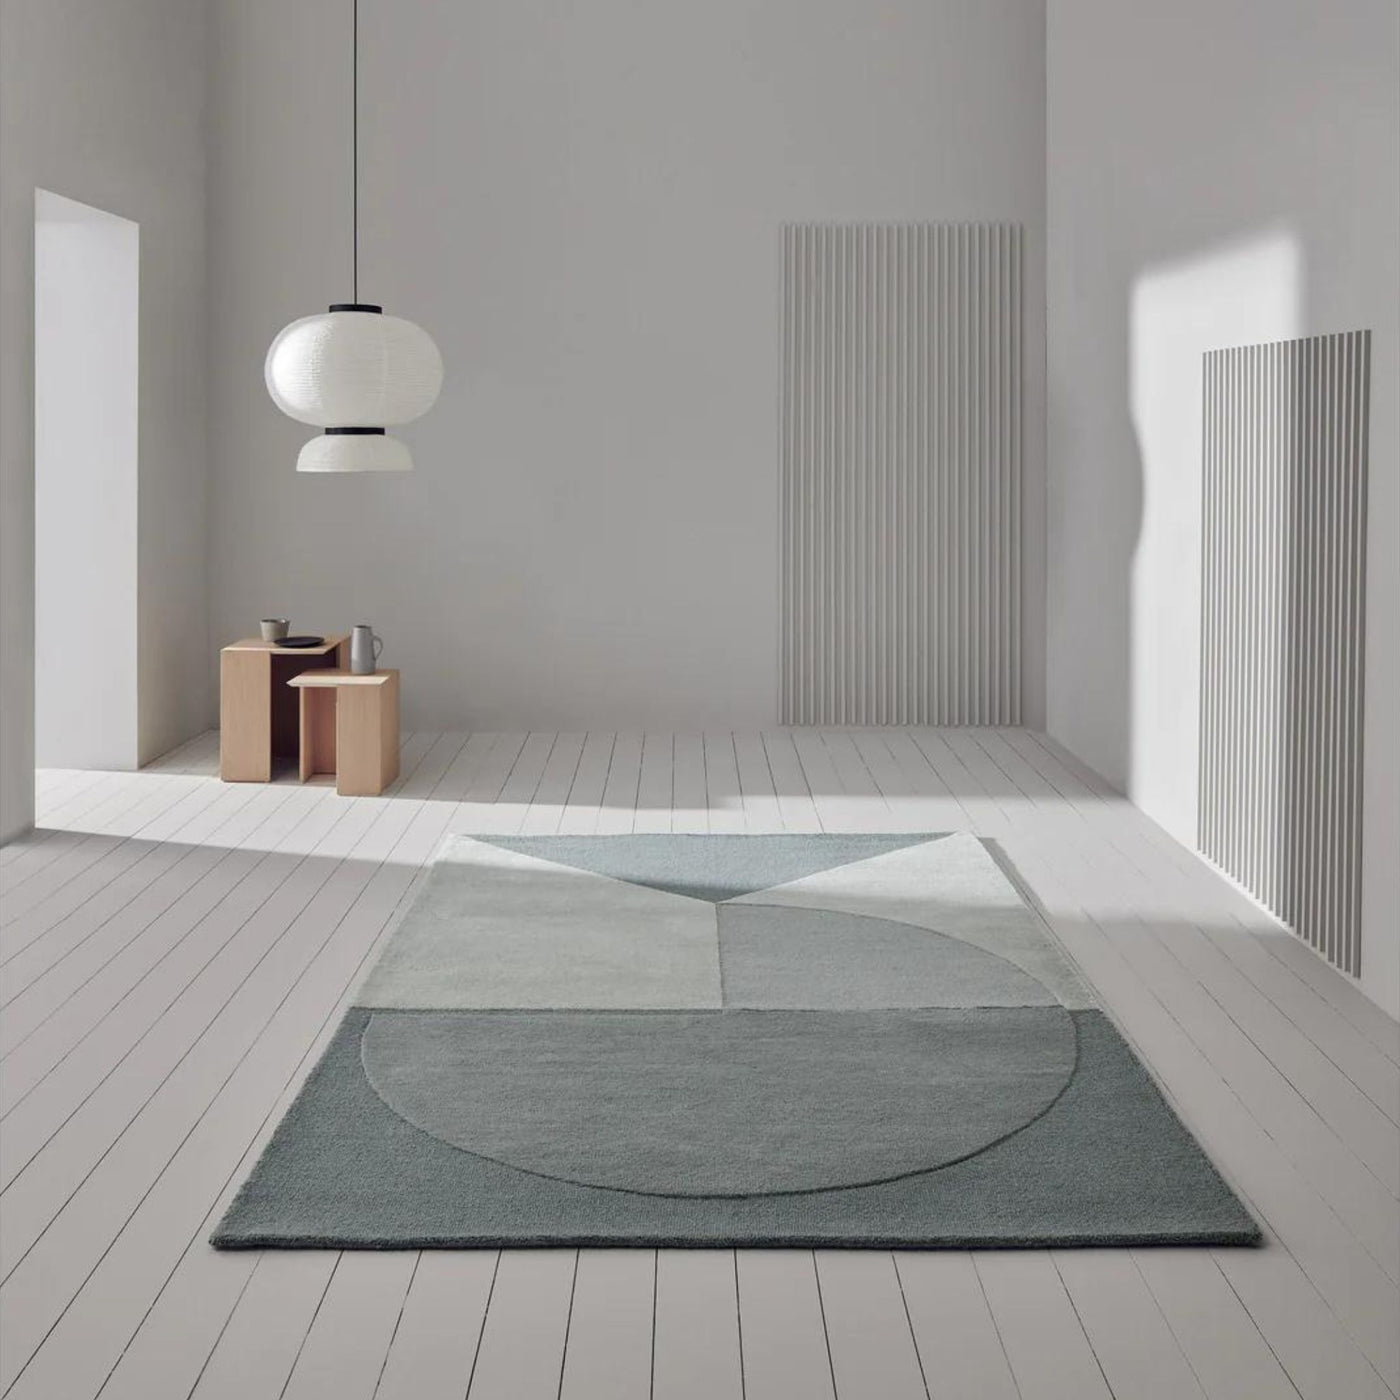 Linie Design Satomi Rug in Room with Formakami Pendant Light